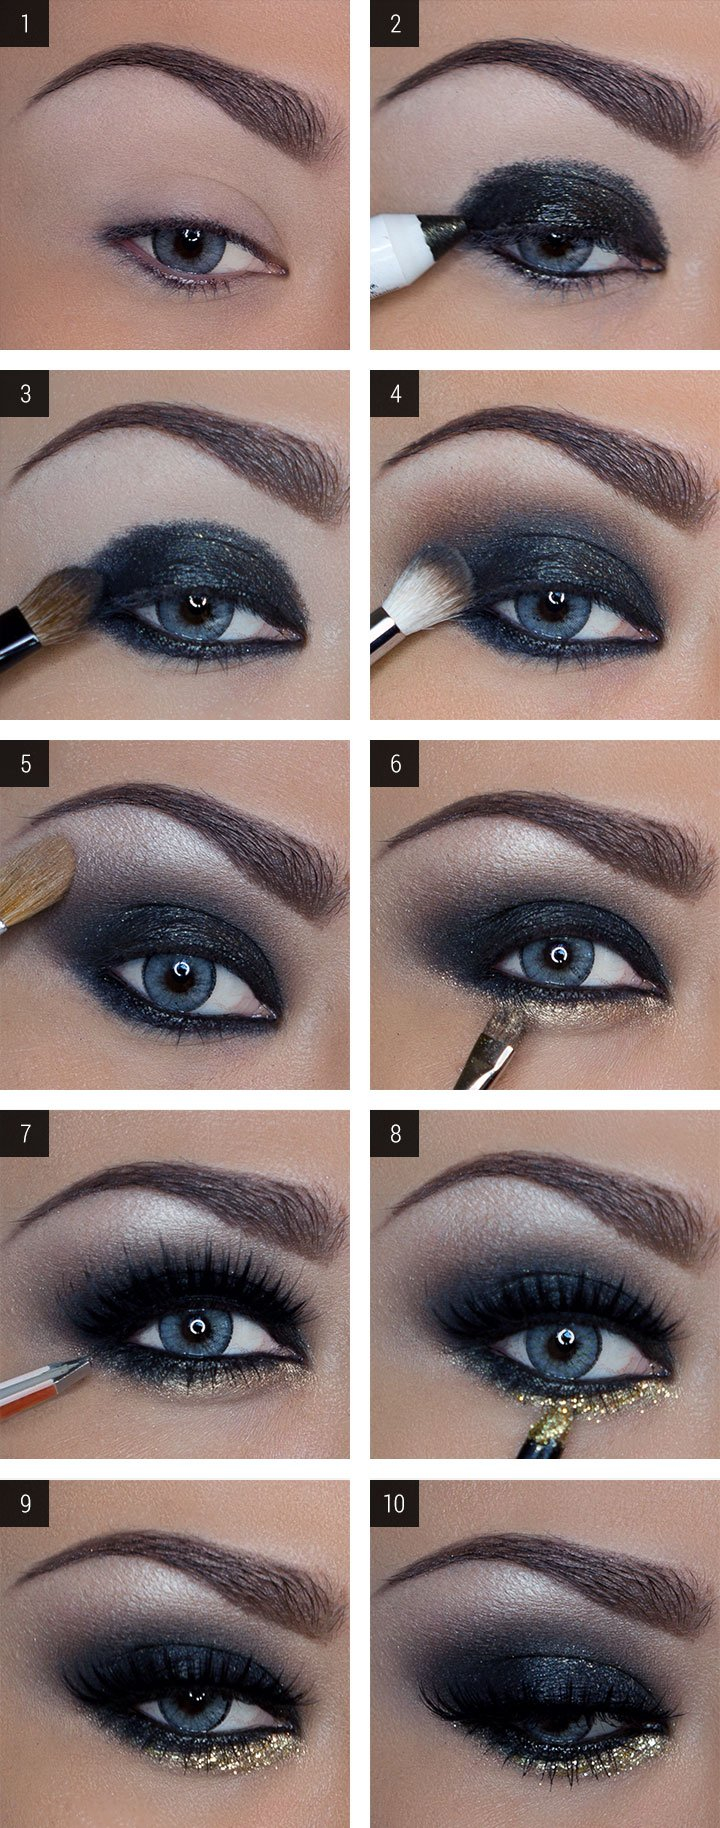 Steps Of Doing Eye Makeup 15 Smokey Eye Tutorials Step Step Guide To Perfect Hollywood Makeup